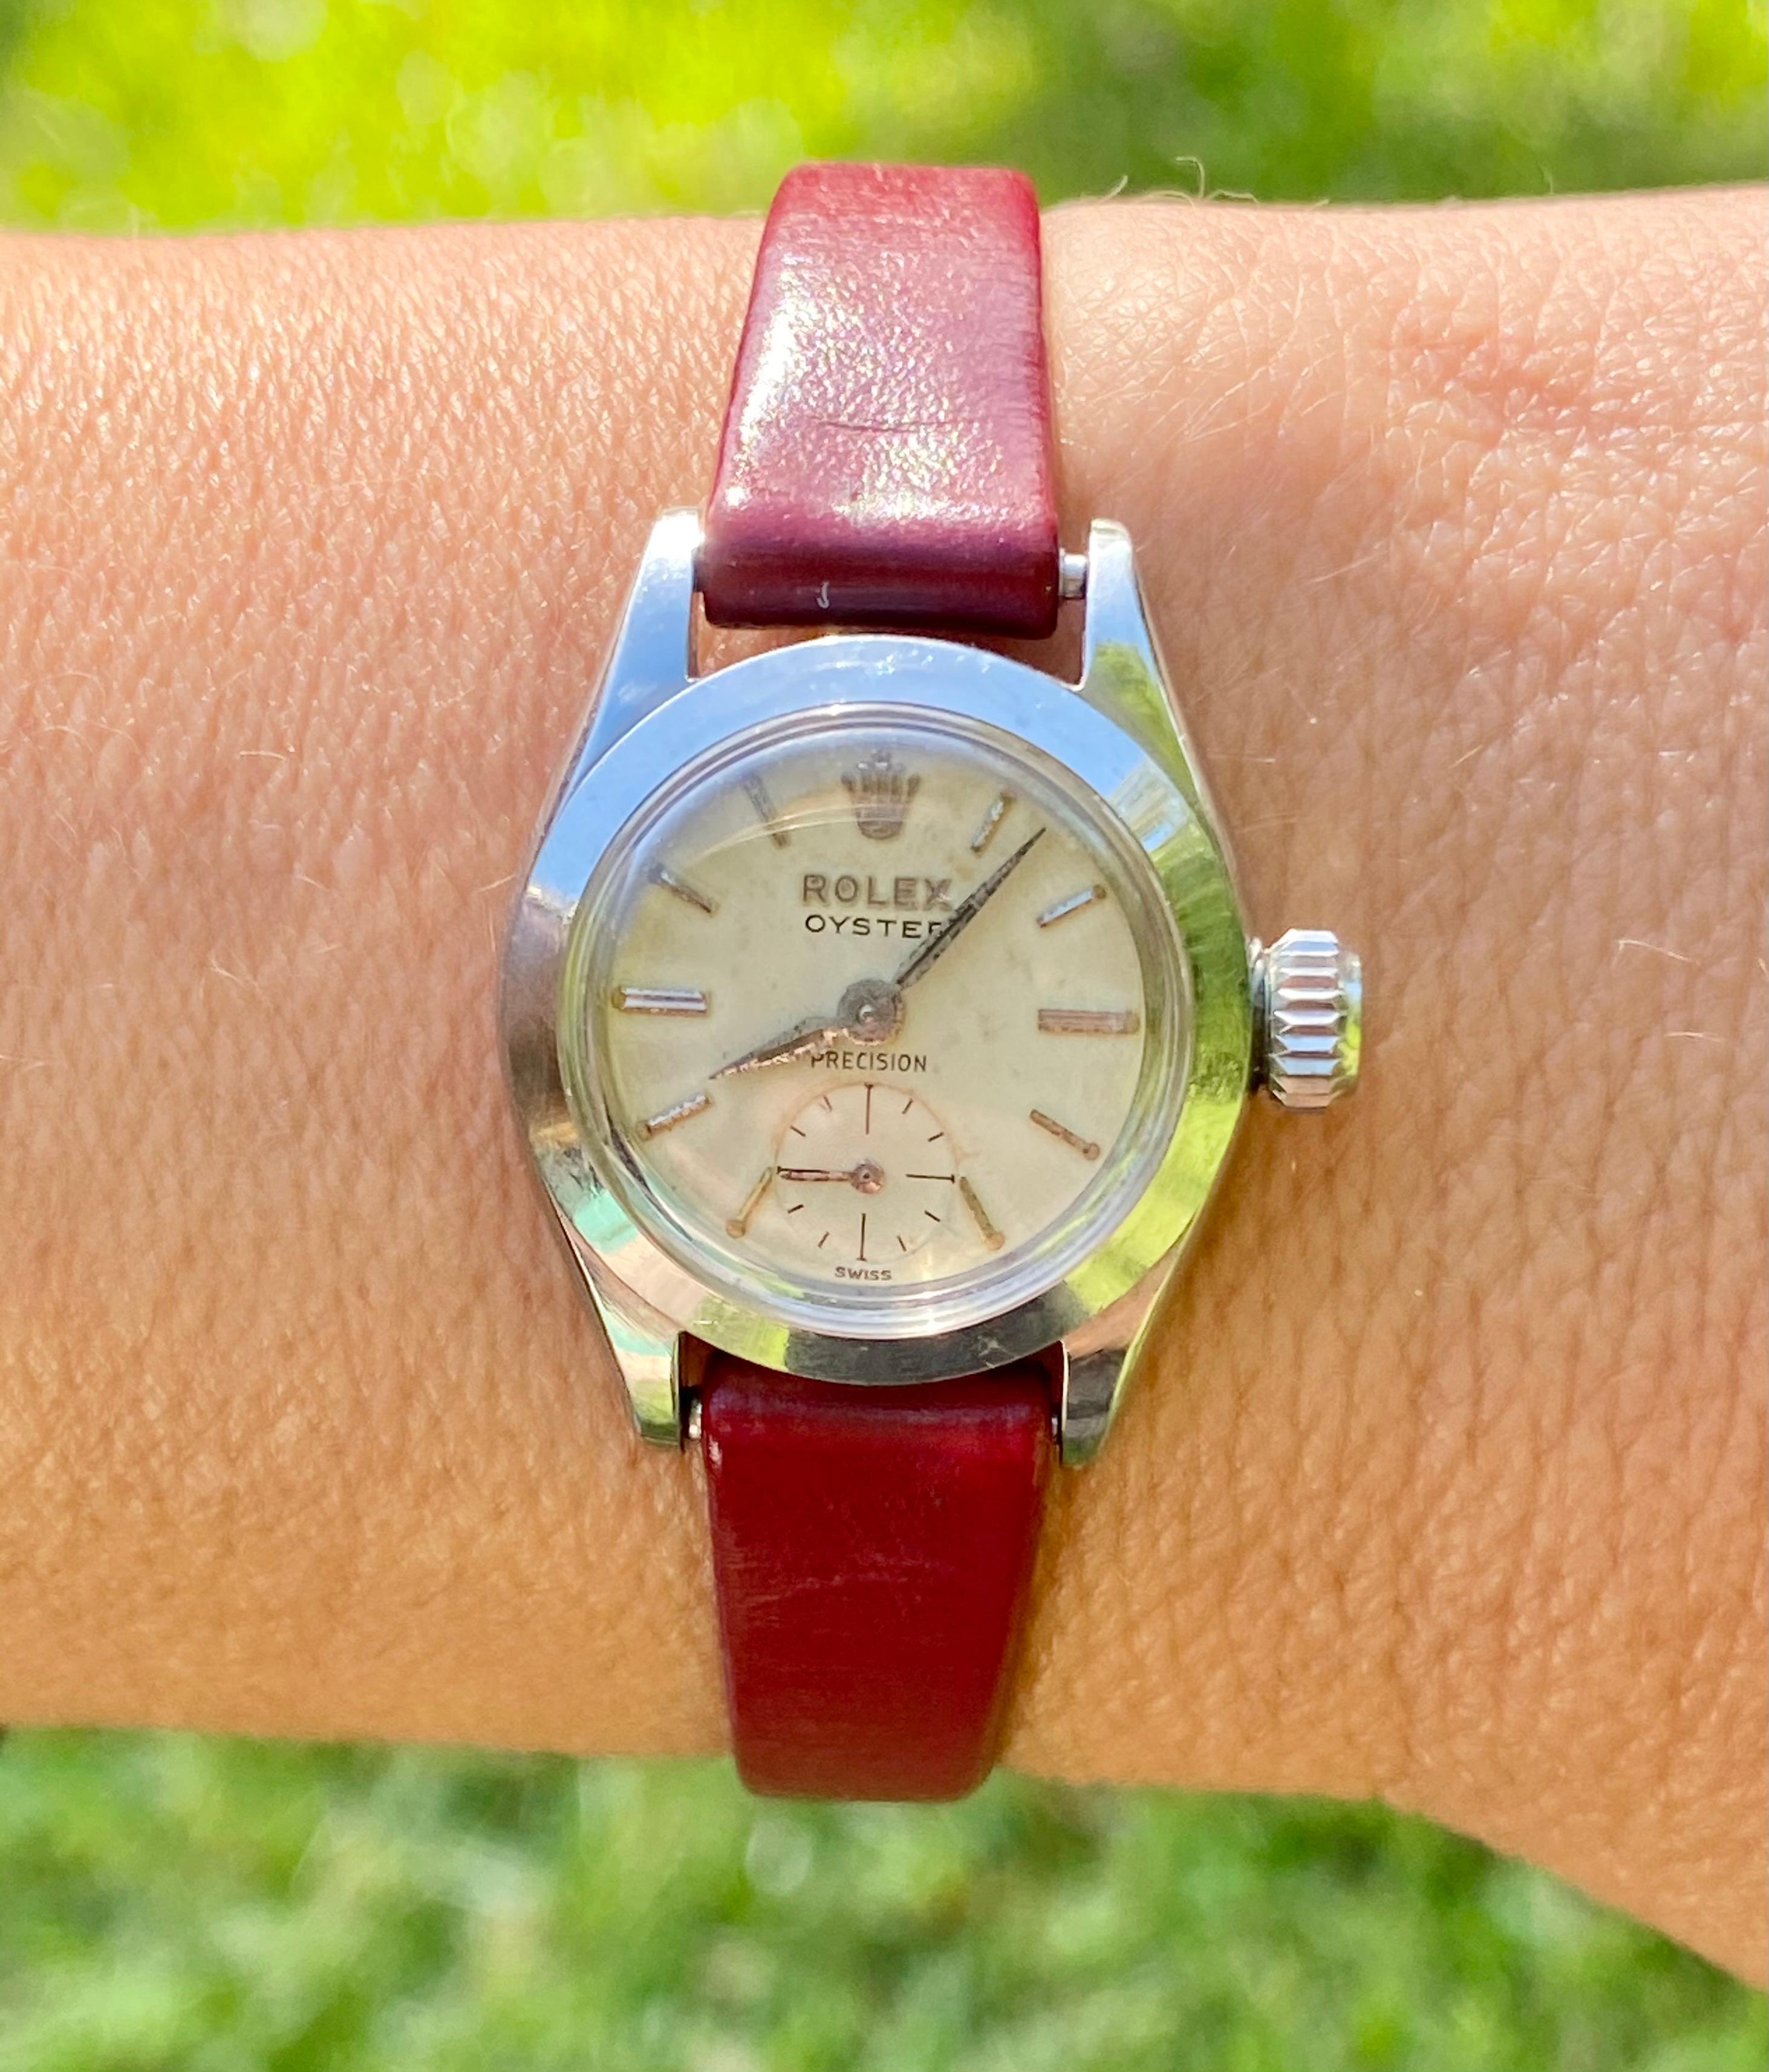 1950's Rolex Oyster Speedking Precision in Red Leather Strap For Sale 1